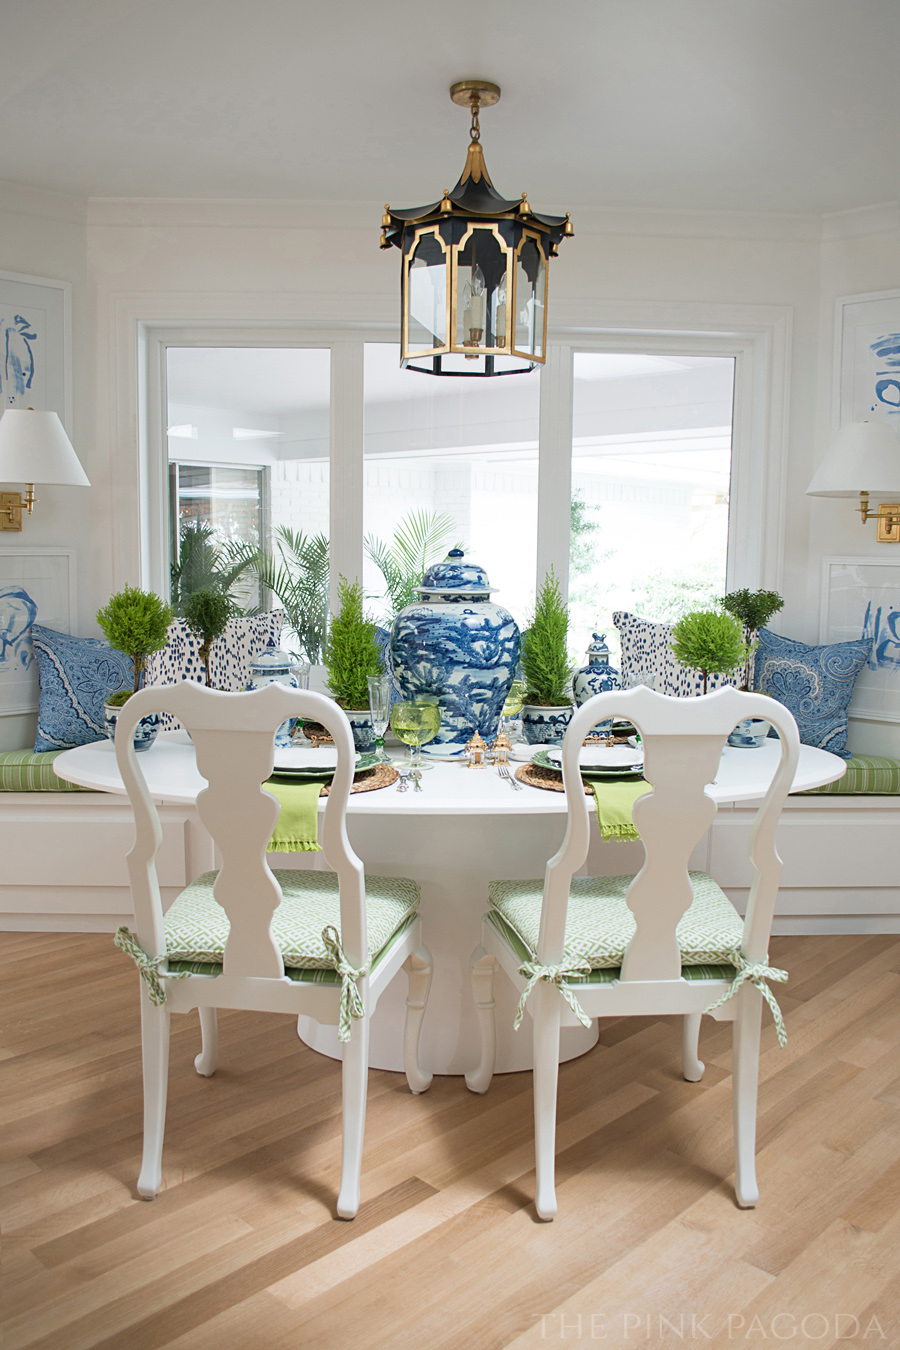 Banquette dining with blue and white created for The Pink Pagoda's One Room Challenge™. Art by Christina Baker, Coleen & Company pagoda lantern, and tabletop styling by Susan Palma.